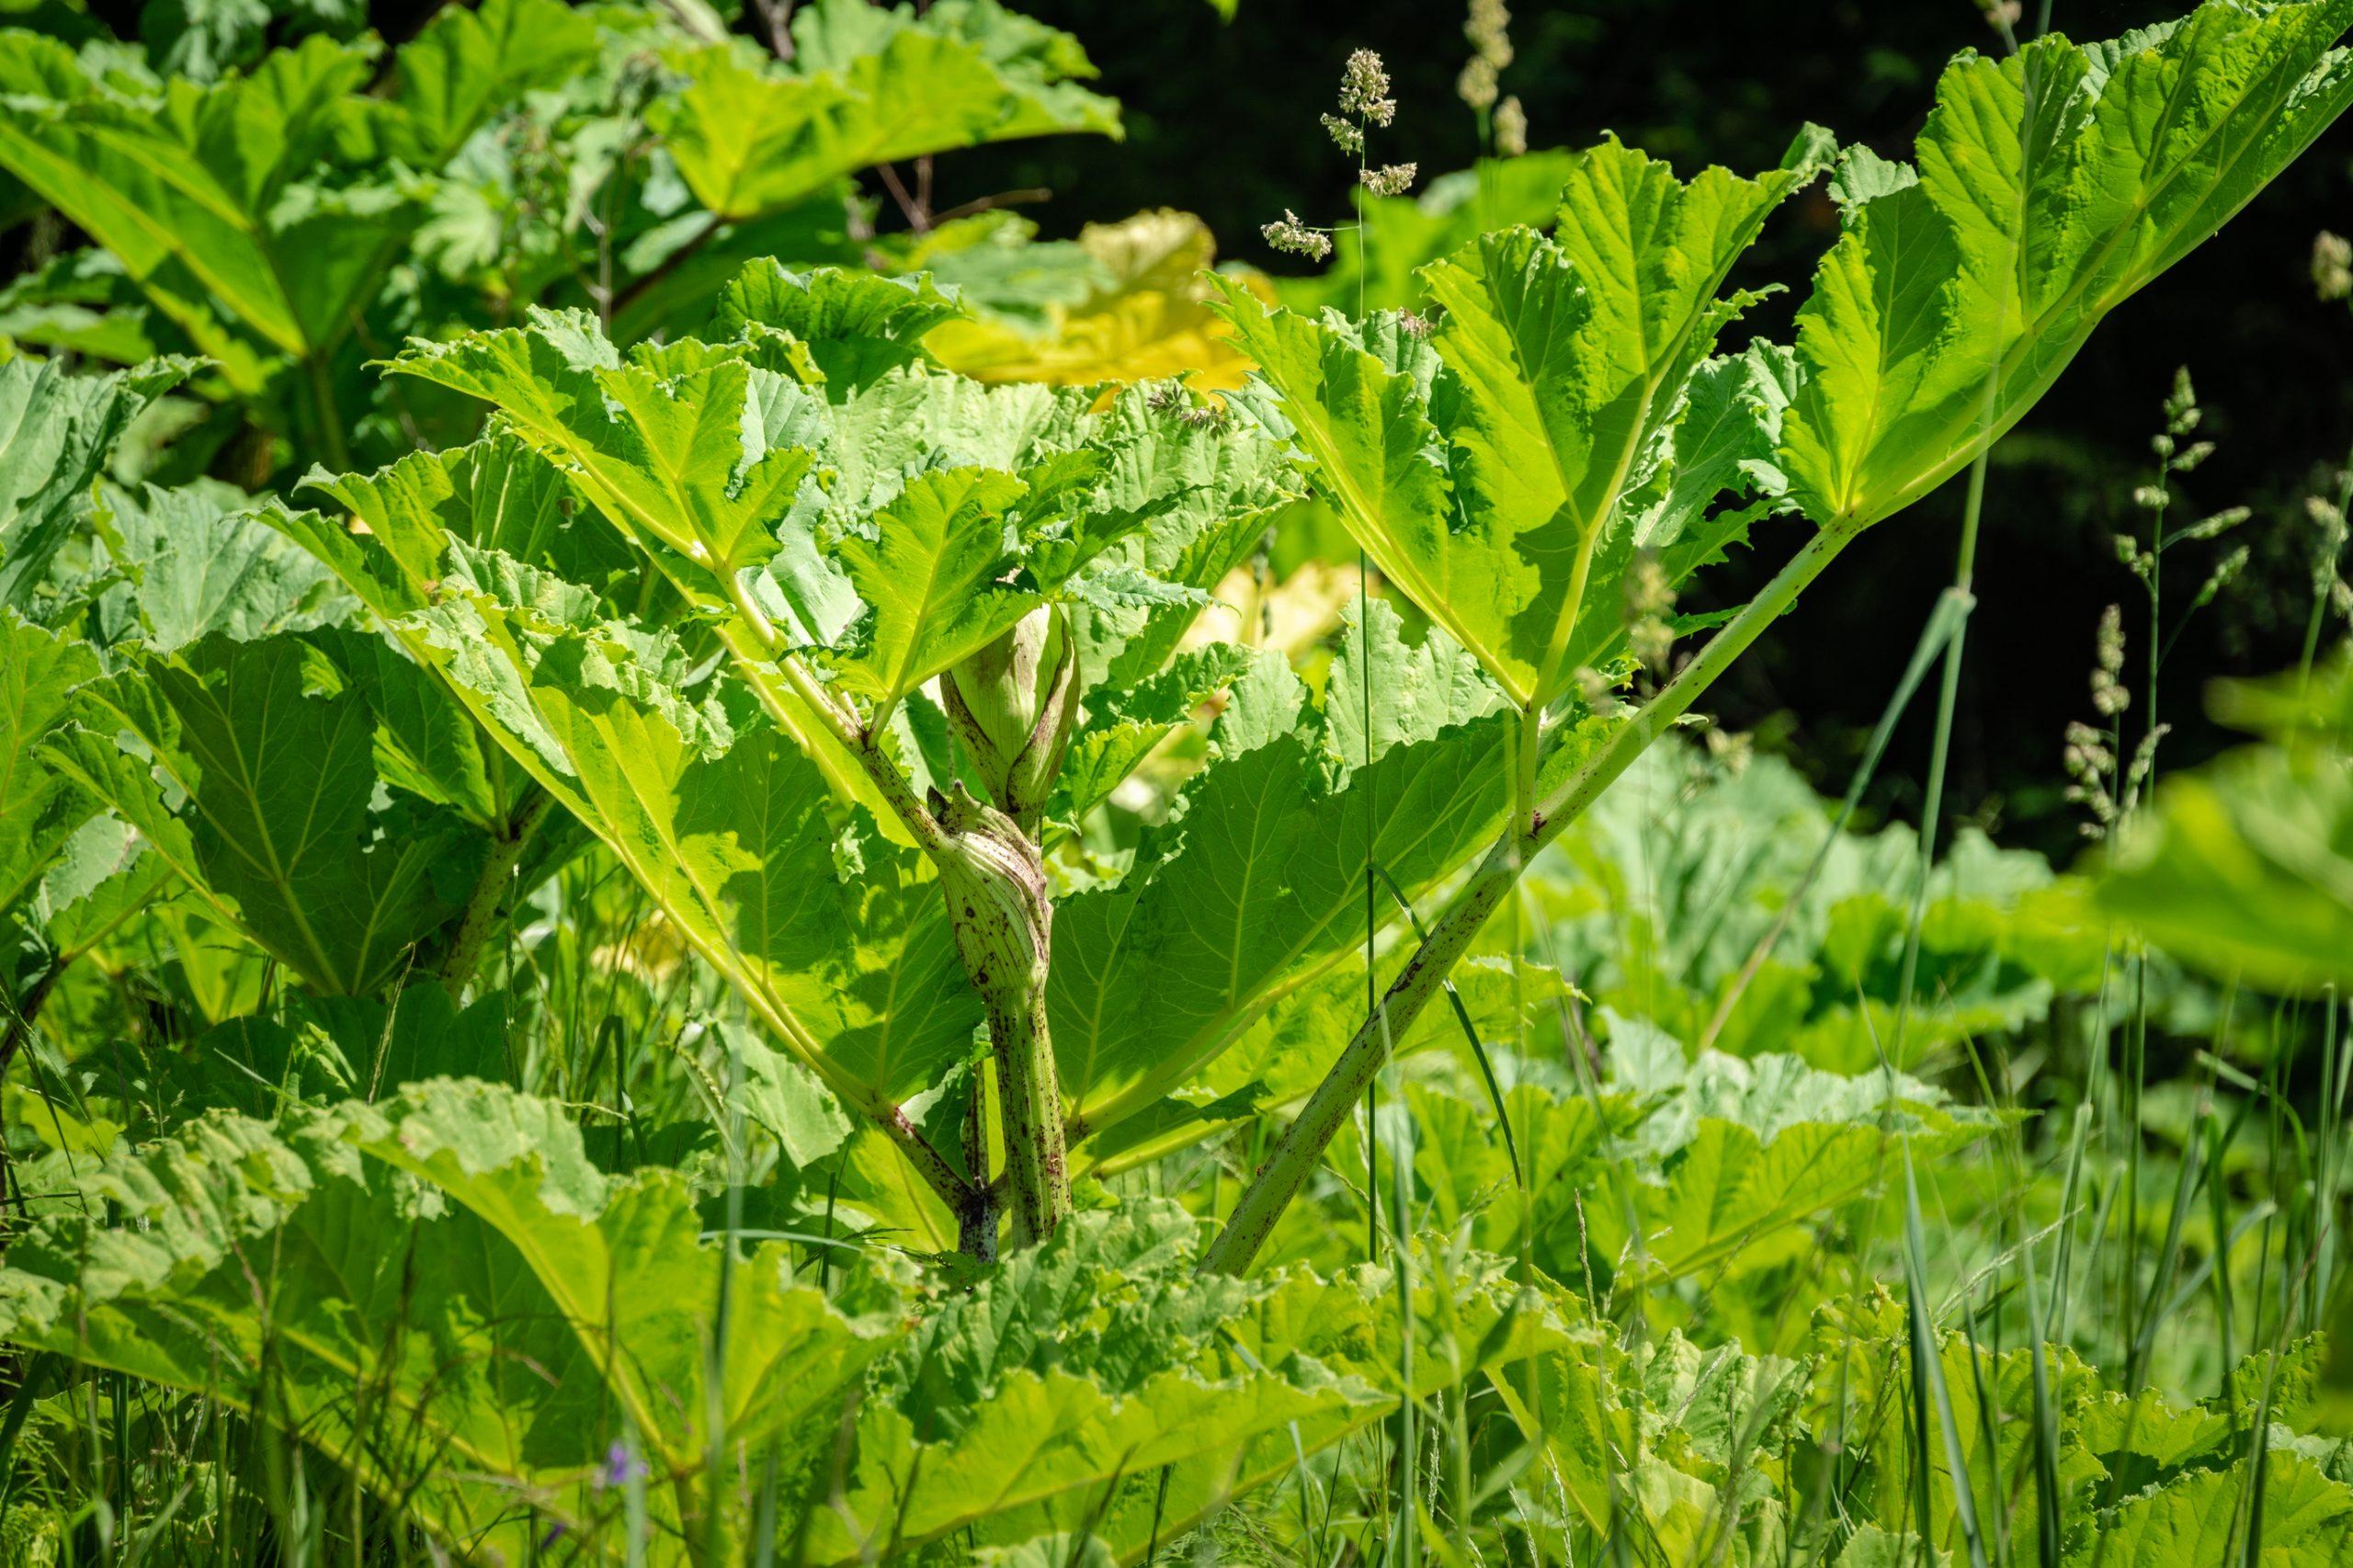 Green poisonous leaves hogweed Heracleum sosnowskyi in nature